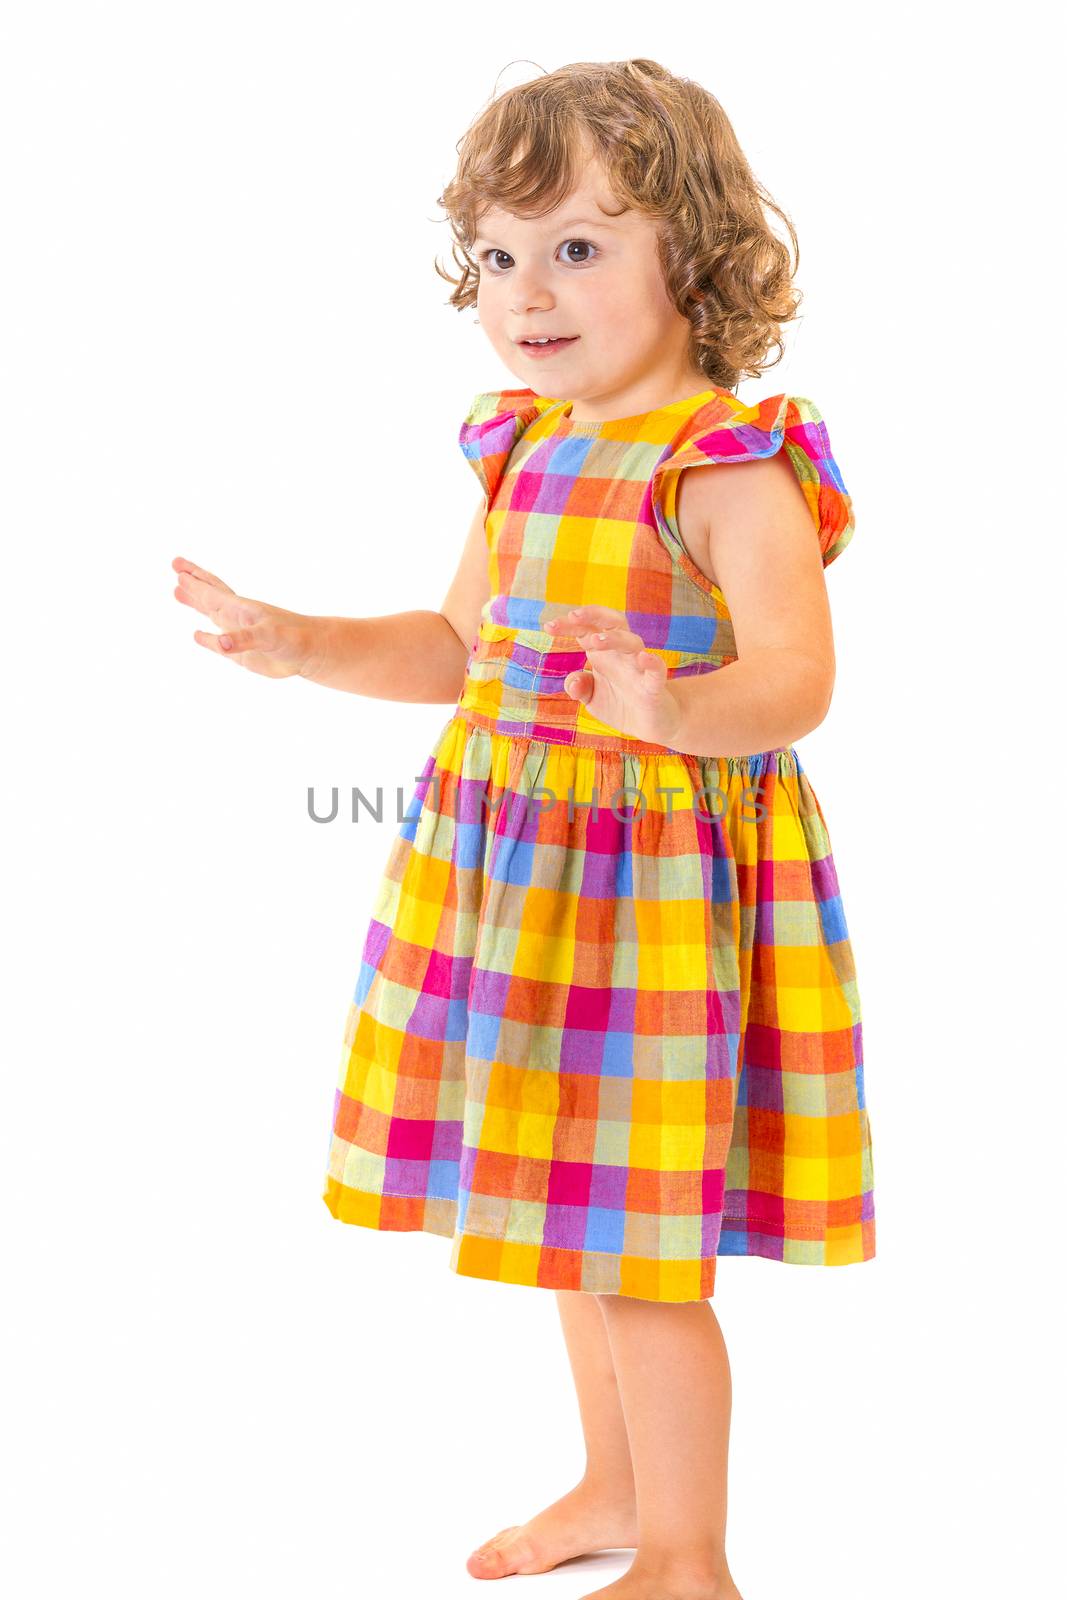 Little girl with hands up on white background